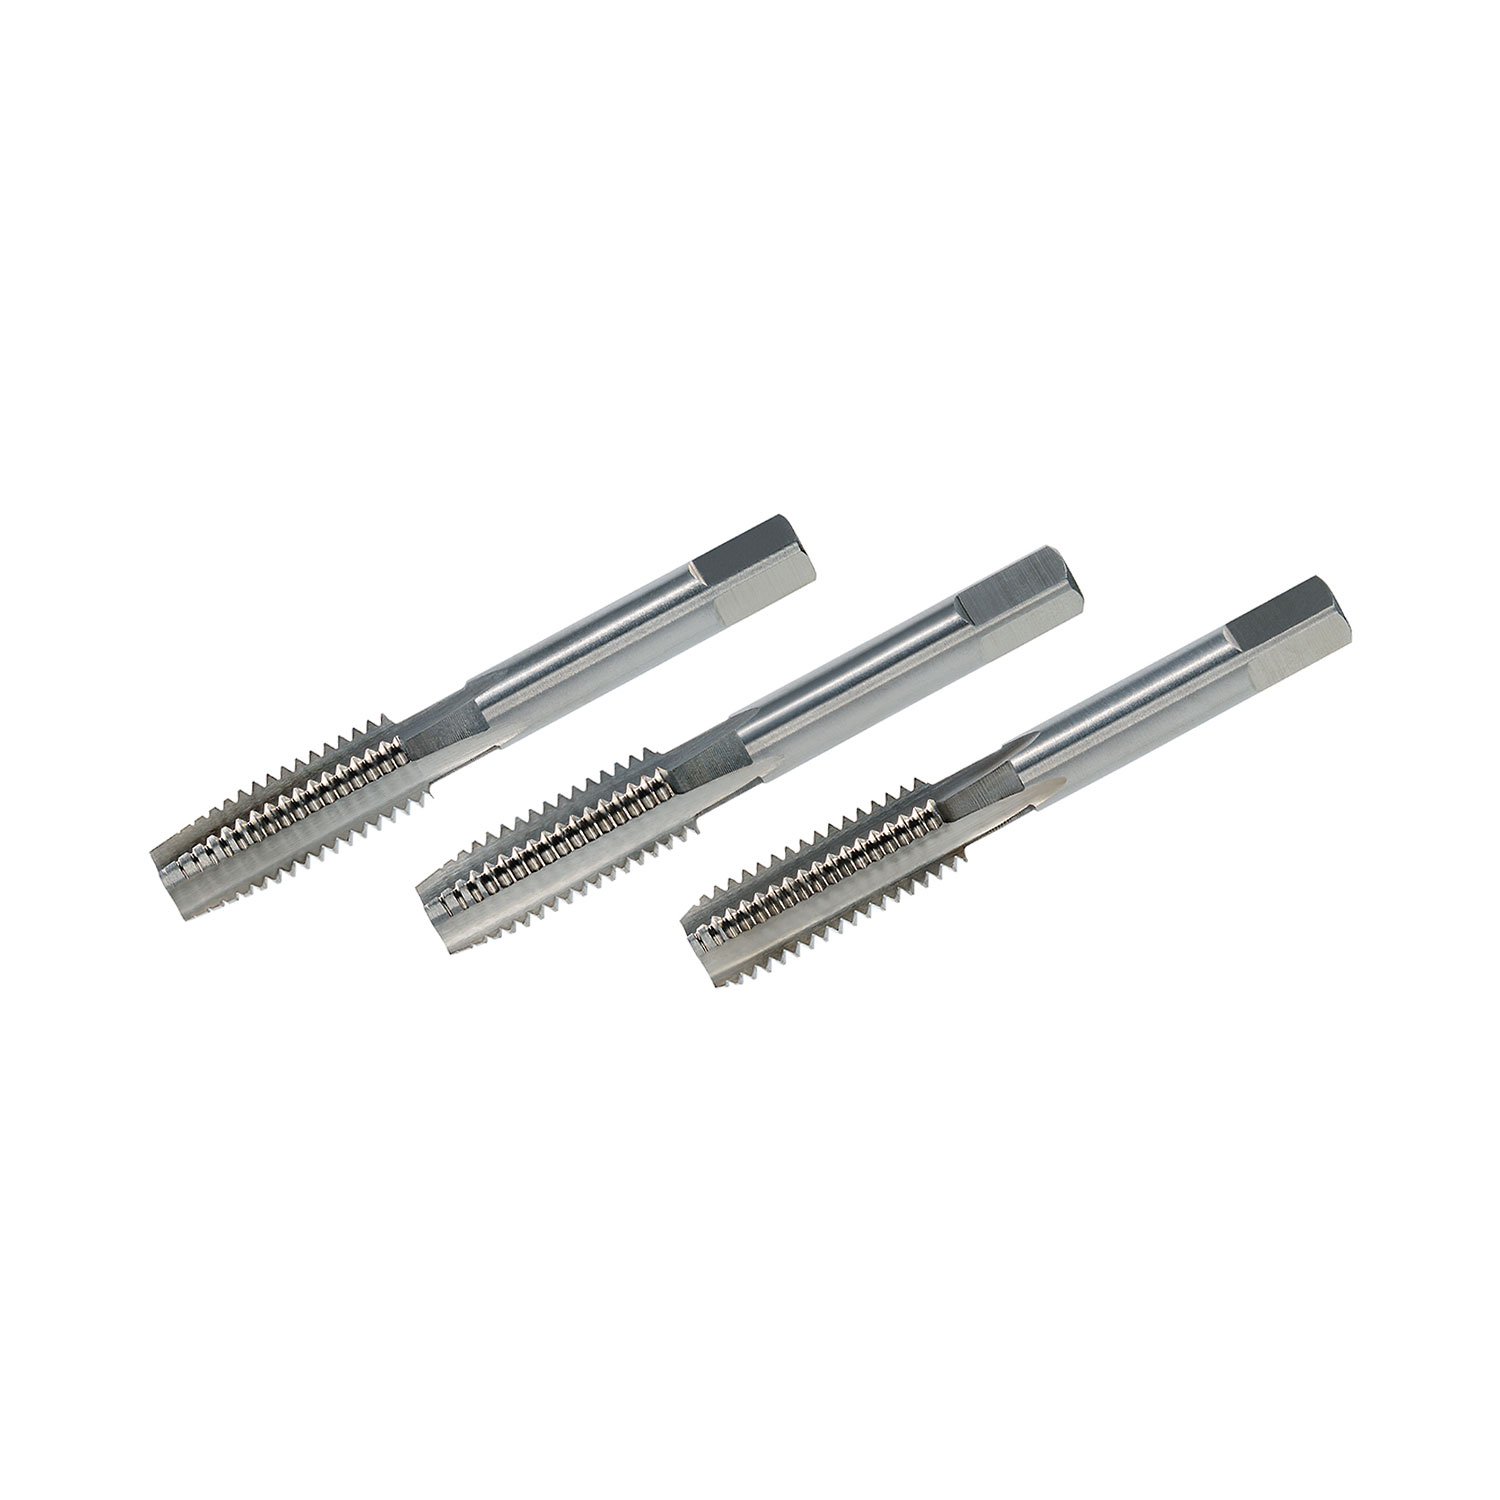 Hand Tap set of 3 pieces DIN 352 HSS-G non-serial form - M 6 x 1.0